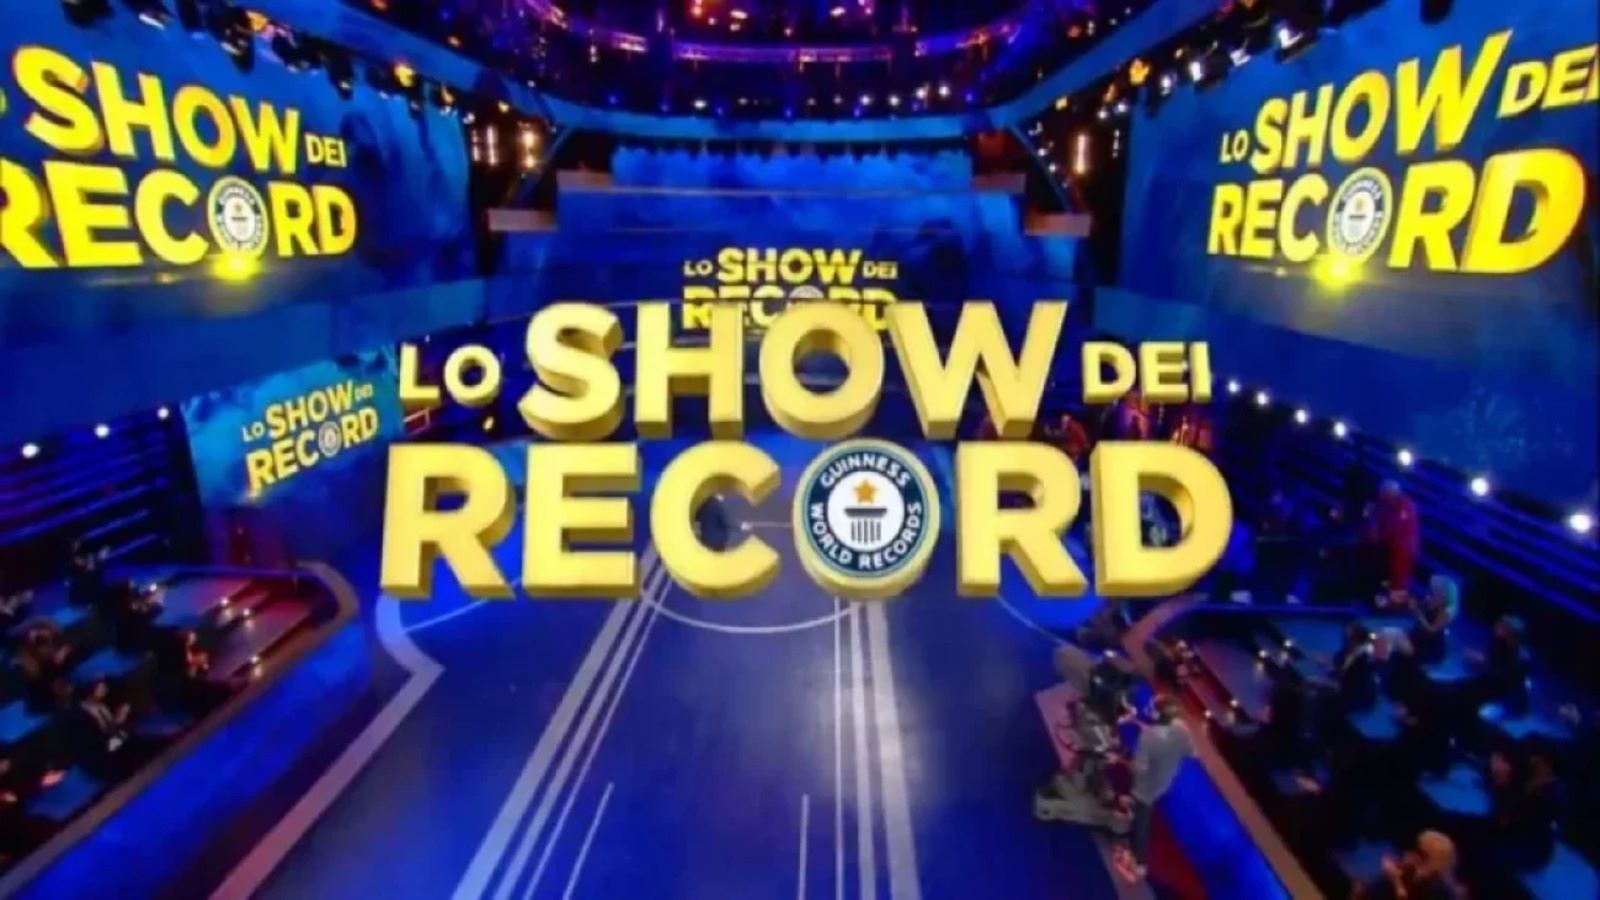 Lo Show dei Record on Canale 5 with Gerry Scotti, the previews of the episode of 23 April